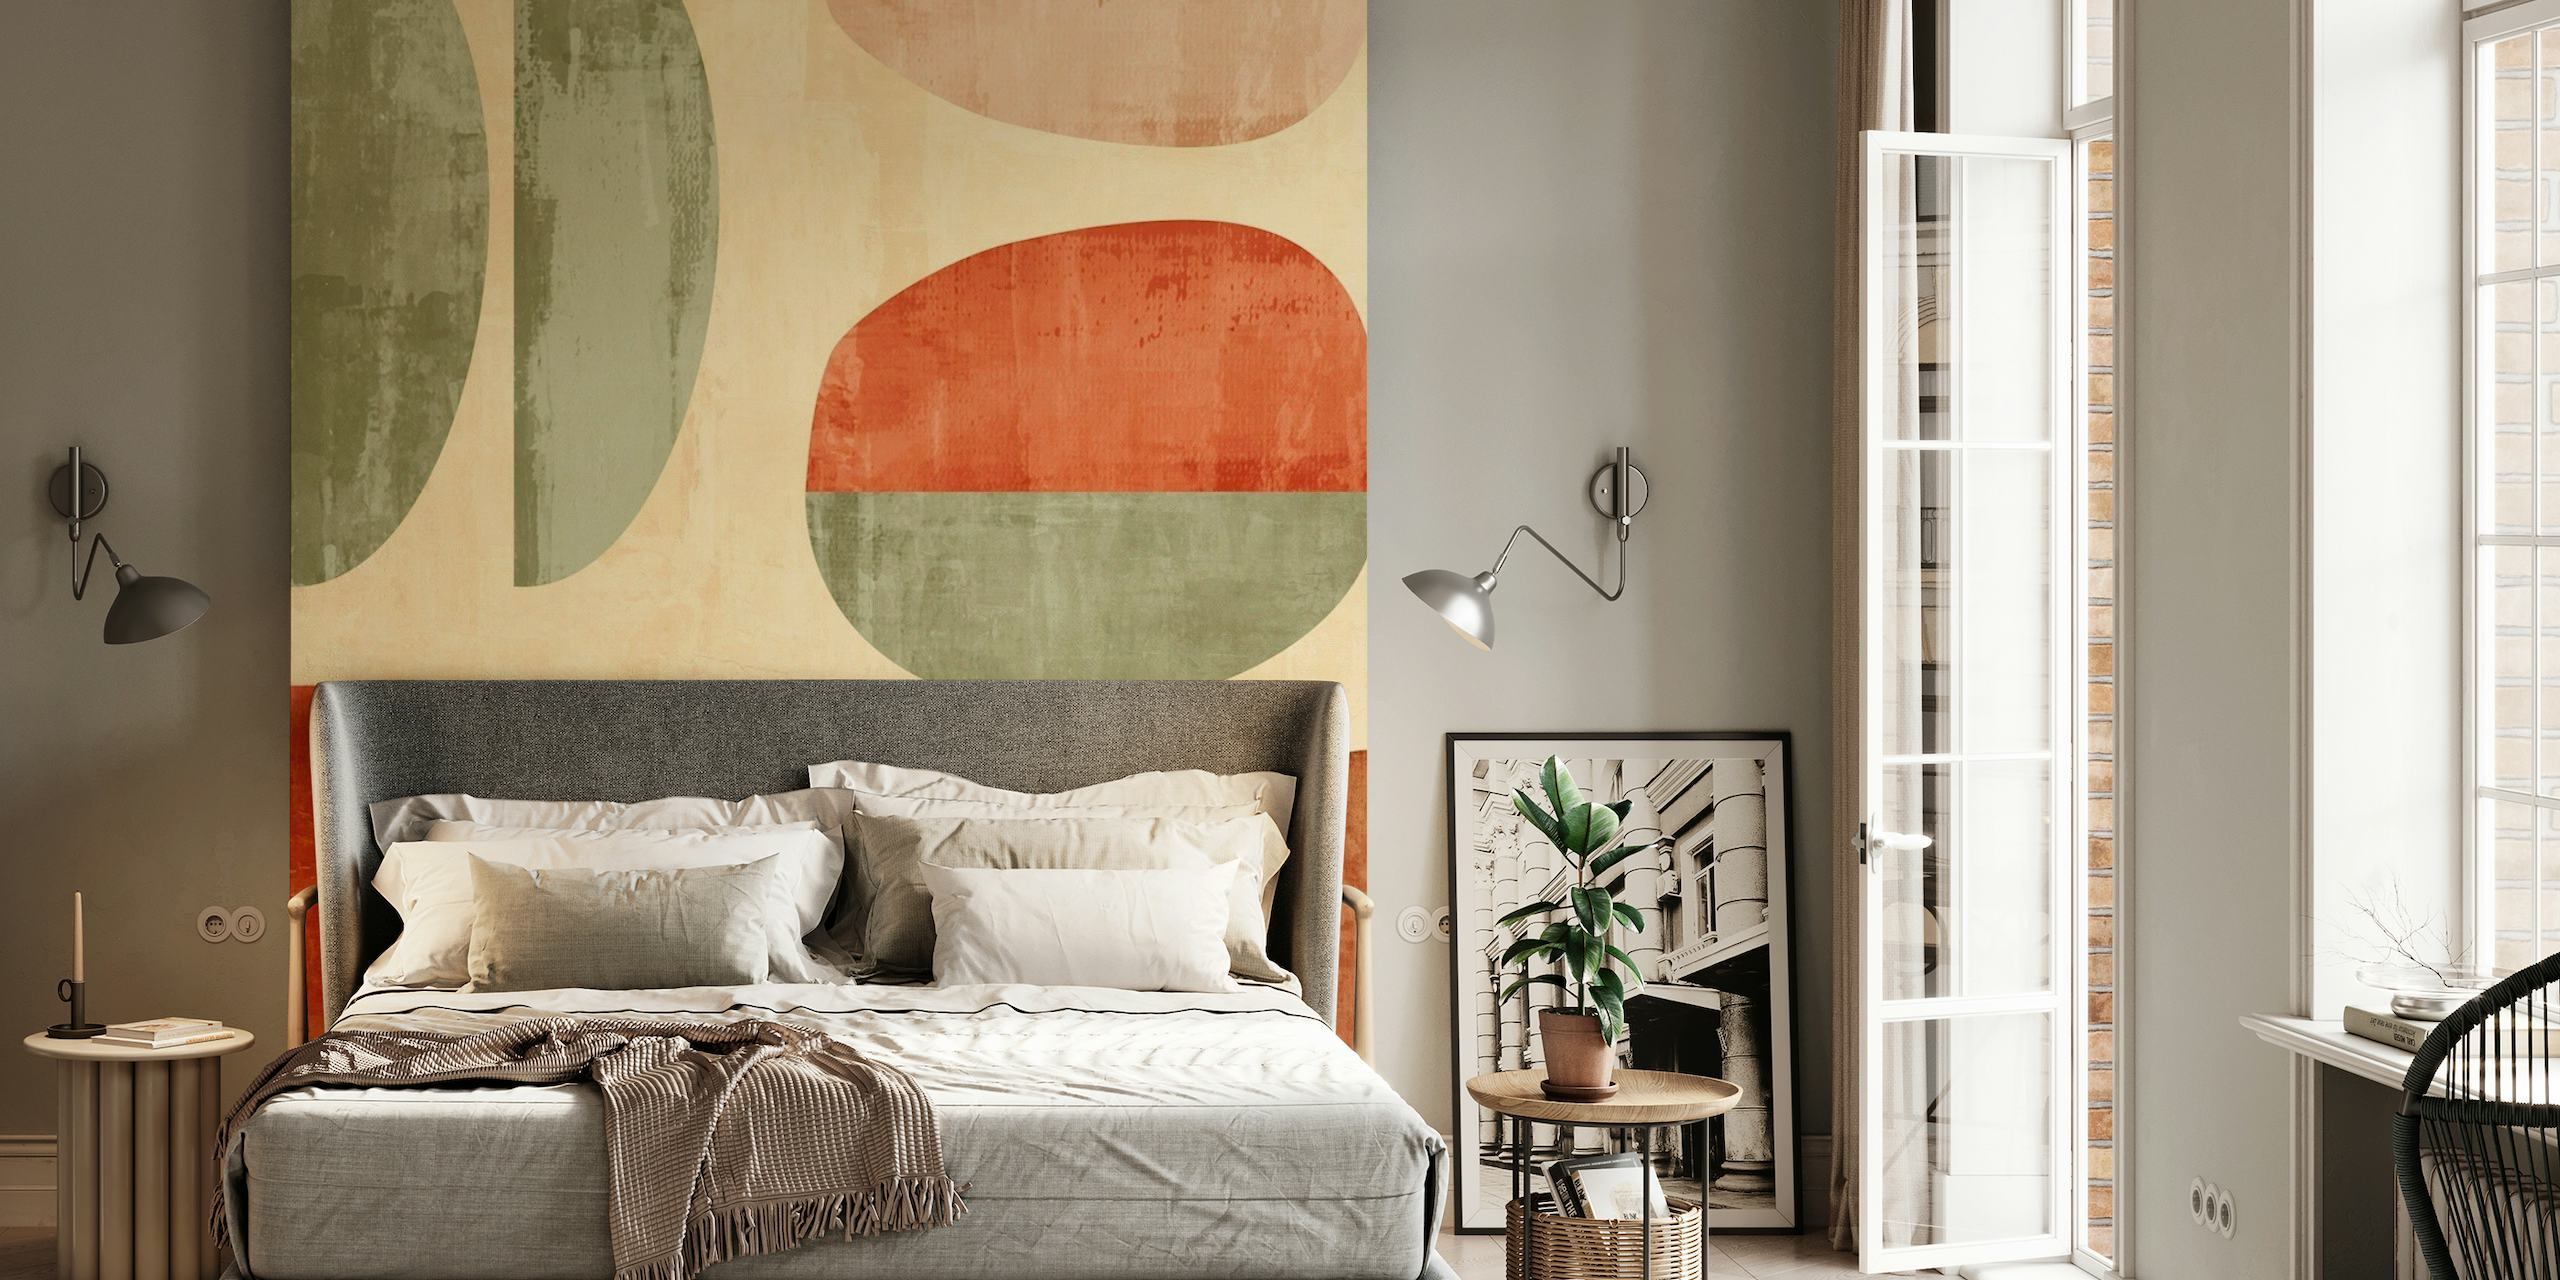 Red and Green Rustic Abstract wall mural with earthy tones and modern geometric shapes